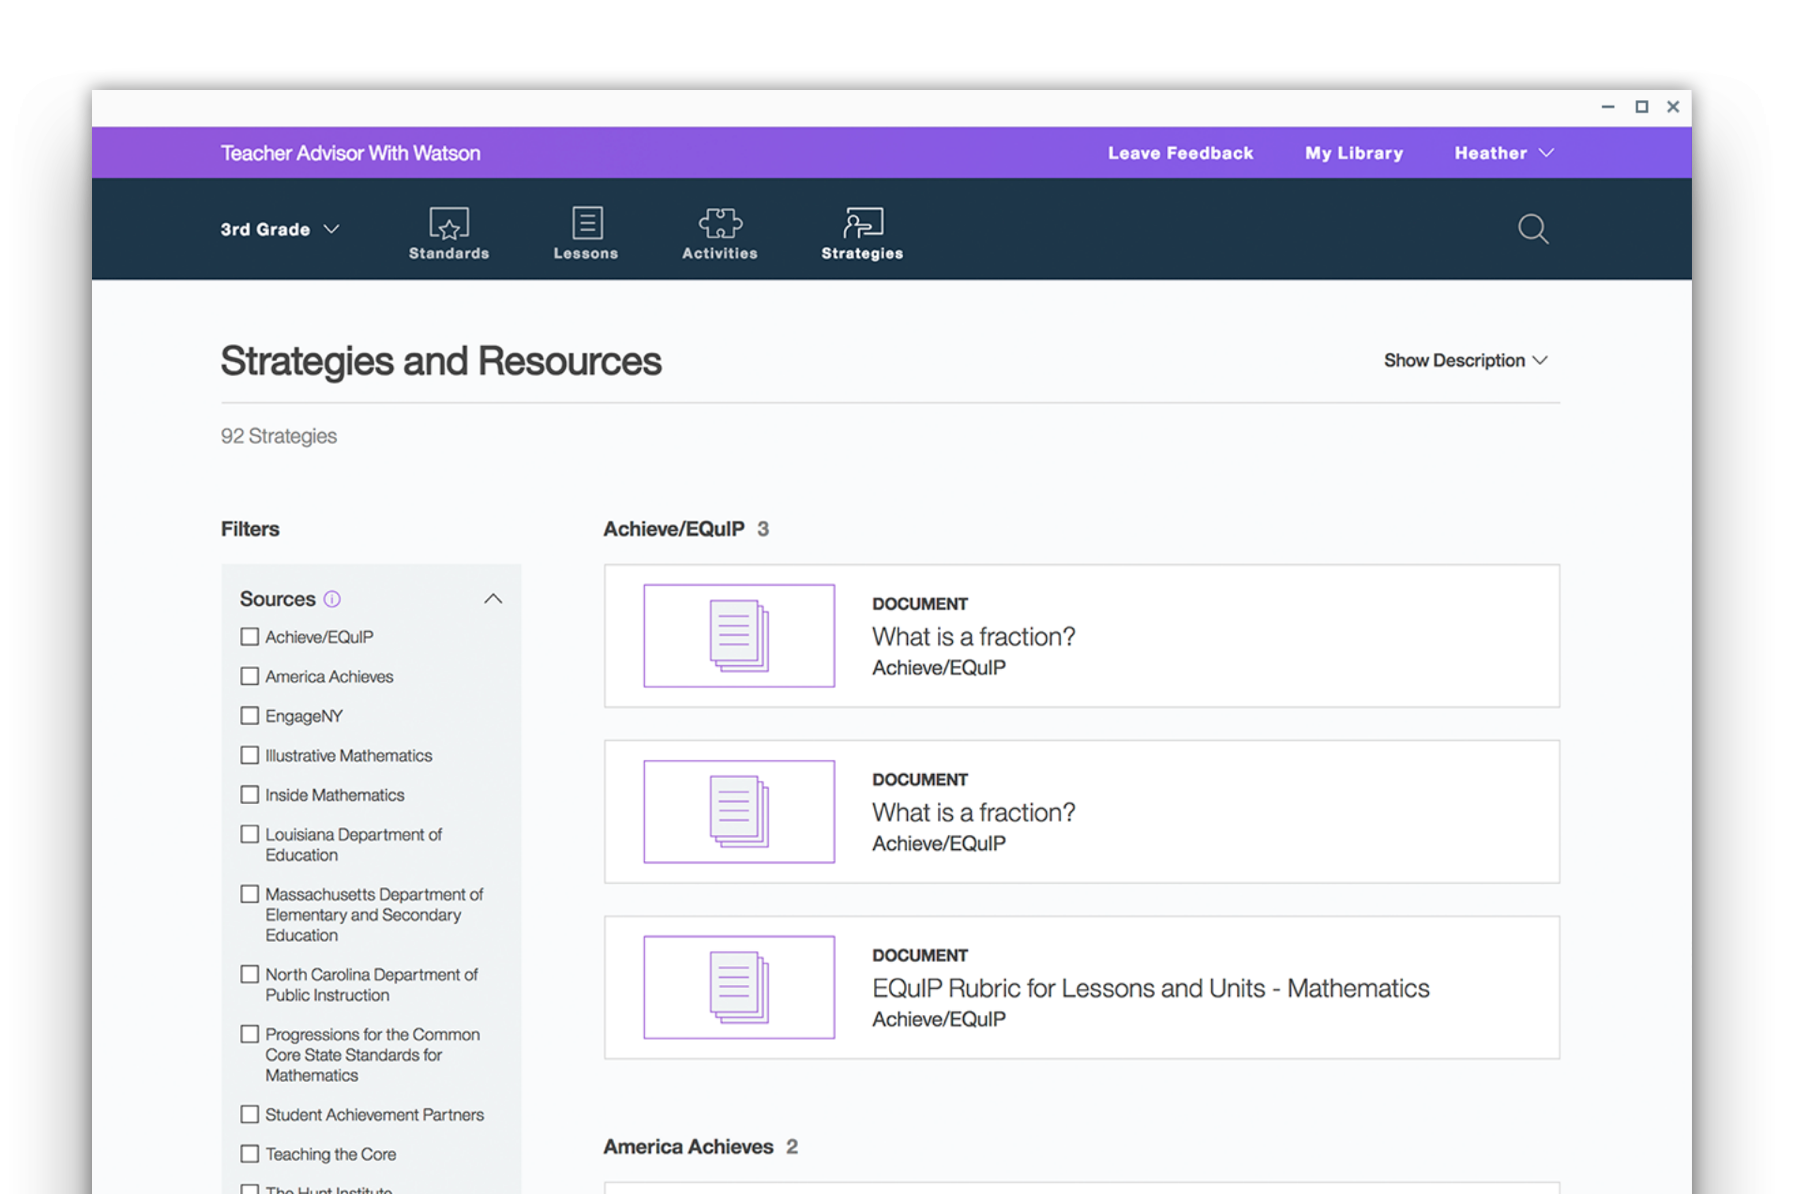 created for IBM: teacher advisor, a curriculum builder with purple and white user interface.